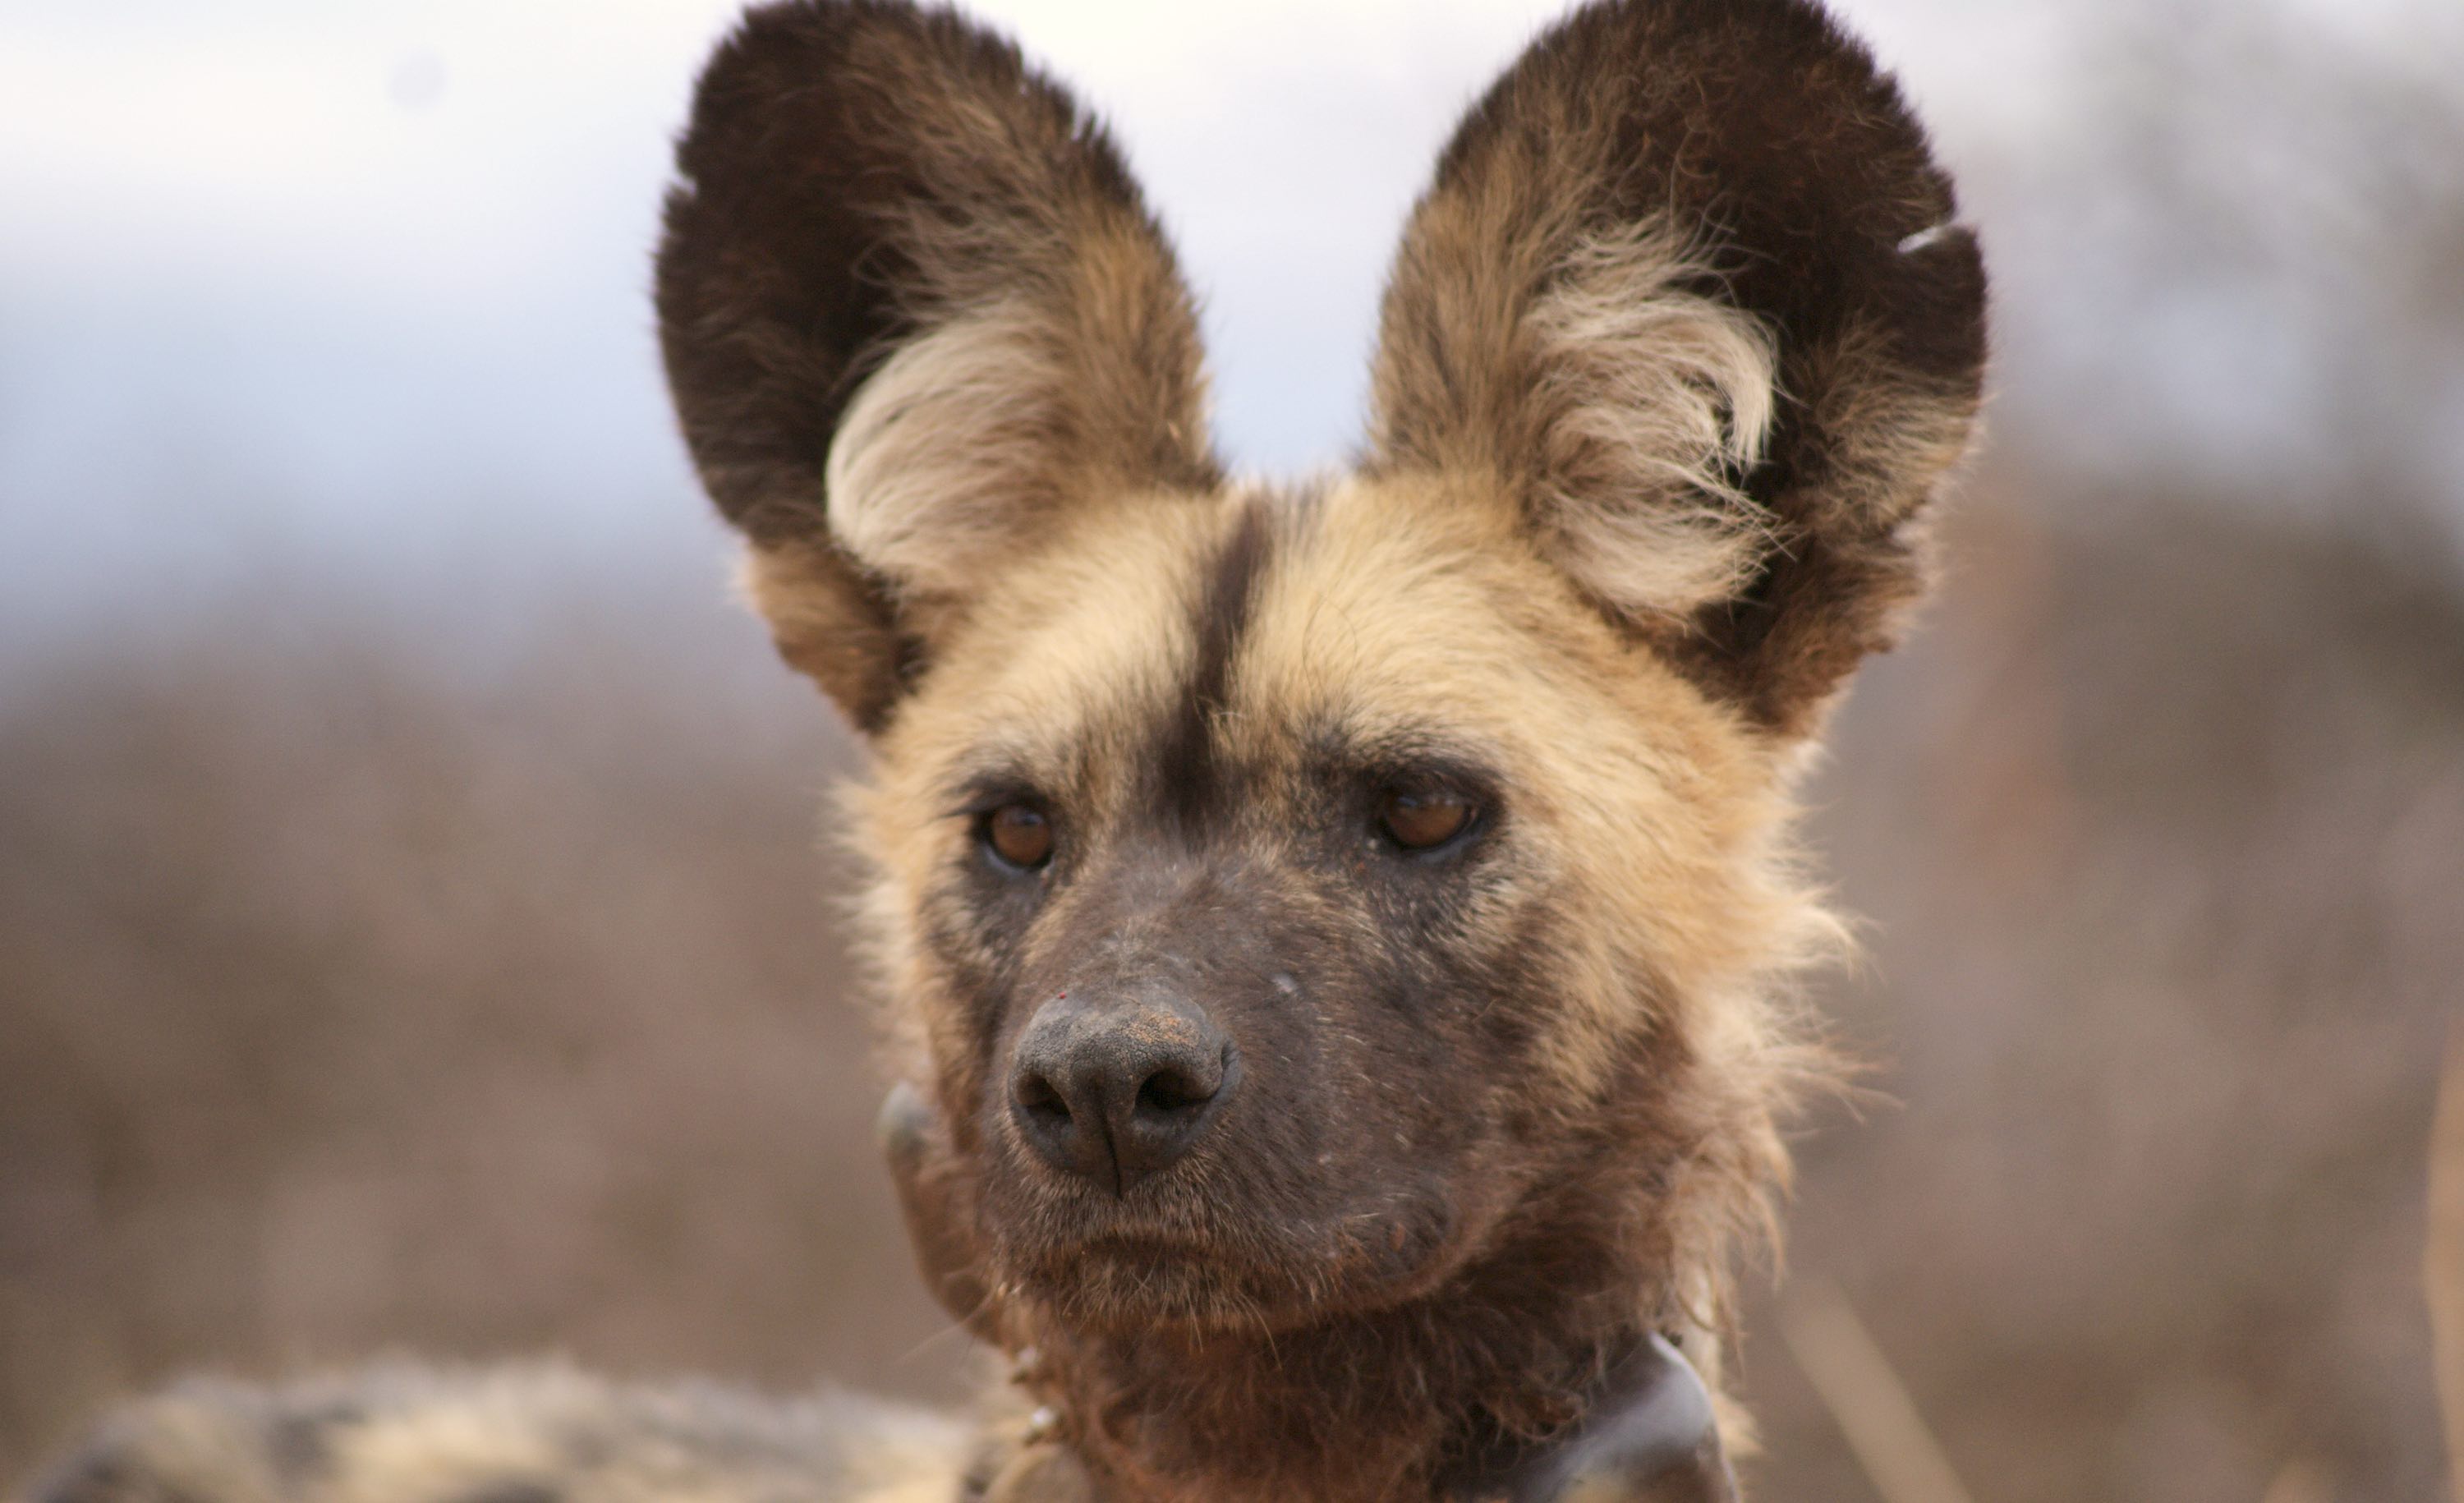 A close-up of an African wild dog. The tracking collar can just be seen.